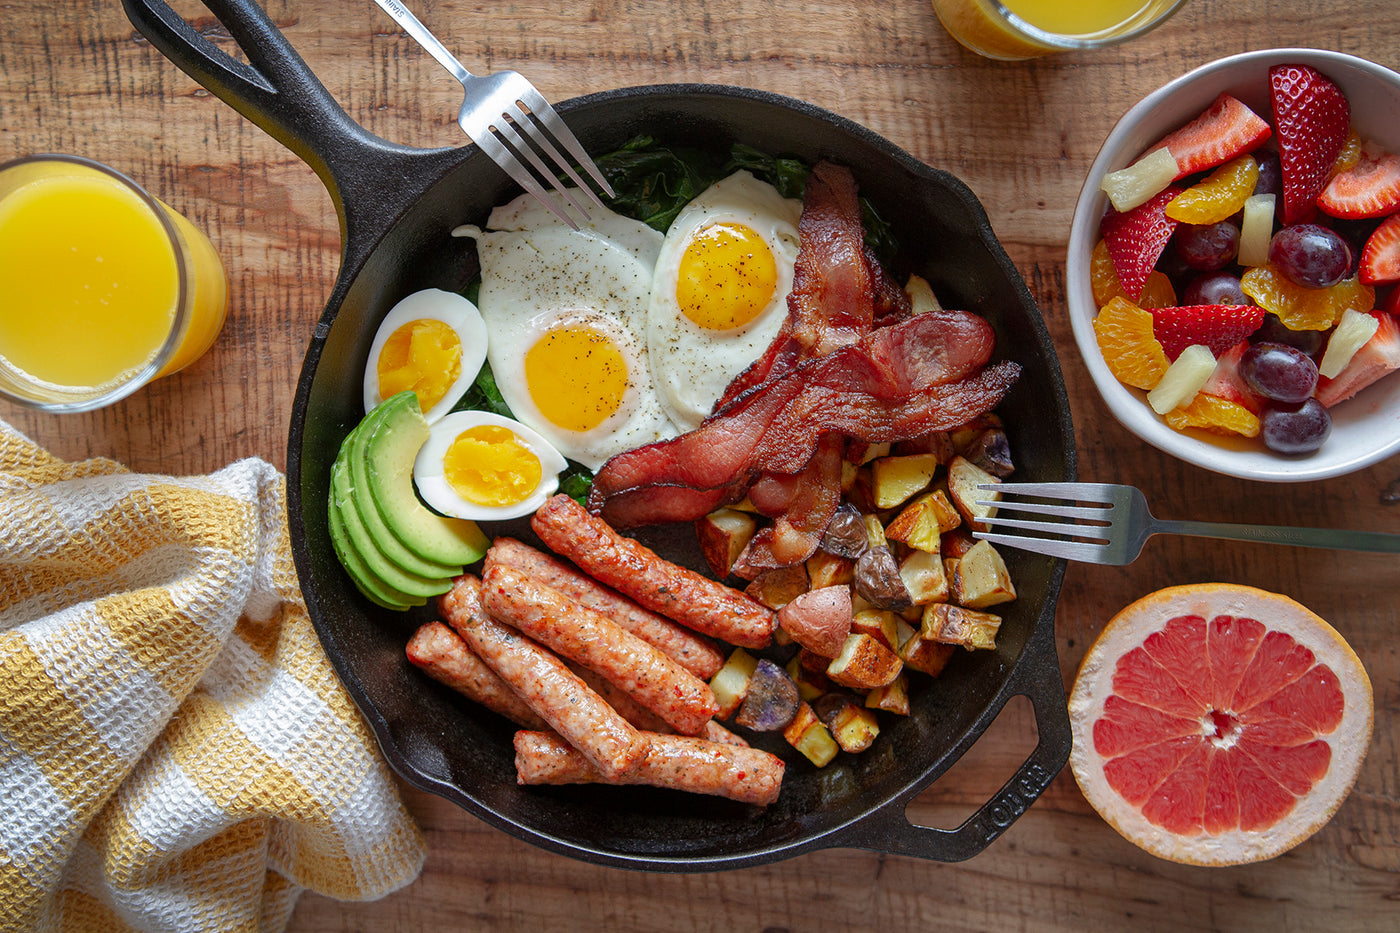 A cast iron skillet is filled with over easy eggs, skillet potatoes, sausage links, and bacon. There is a bowl of fruit and a glass of orange juice beside it.